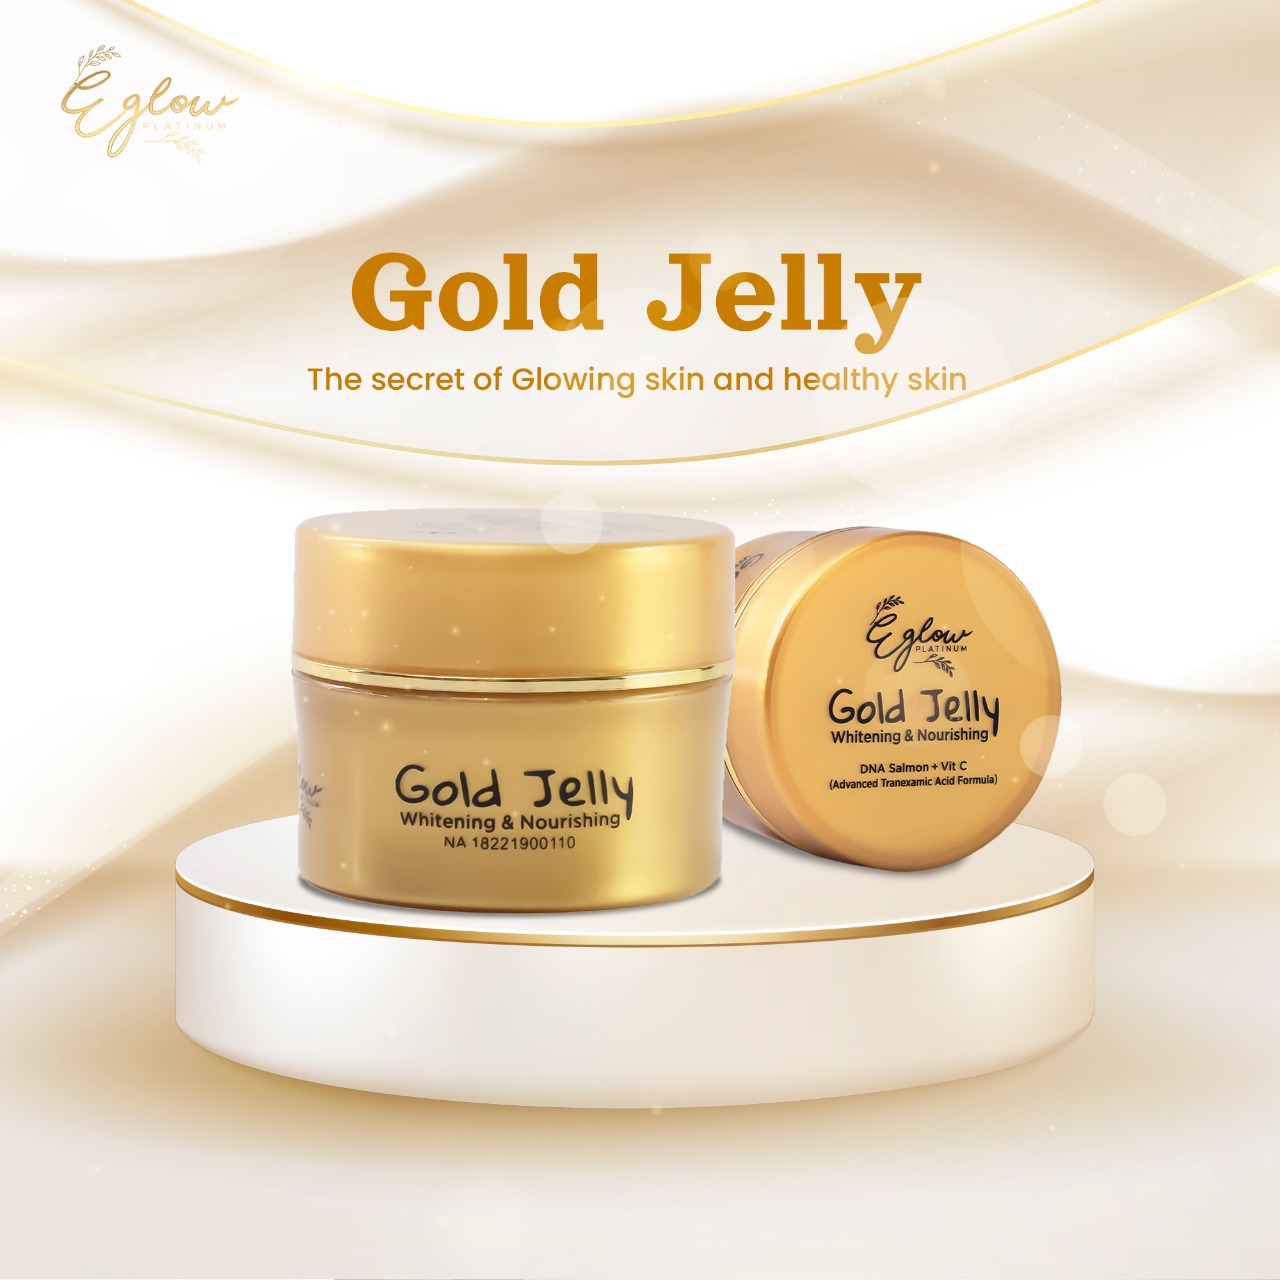 Gold Jelly